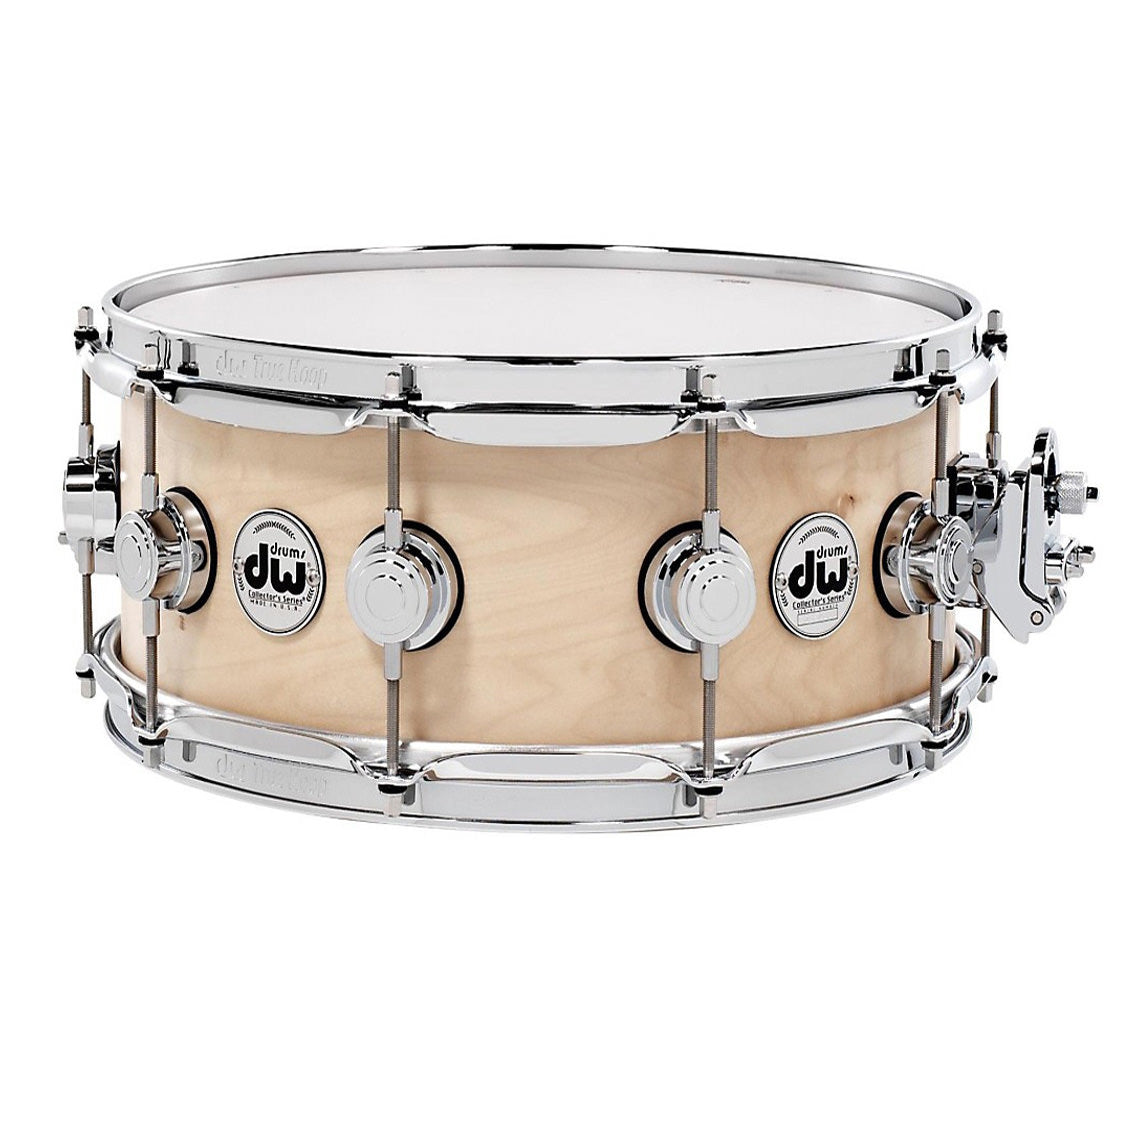 DW Collectors Series 14" x 6" Maple Snare in Natural